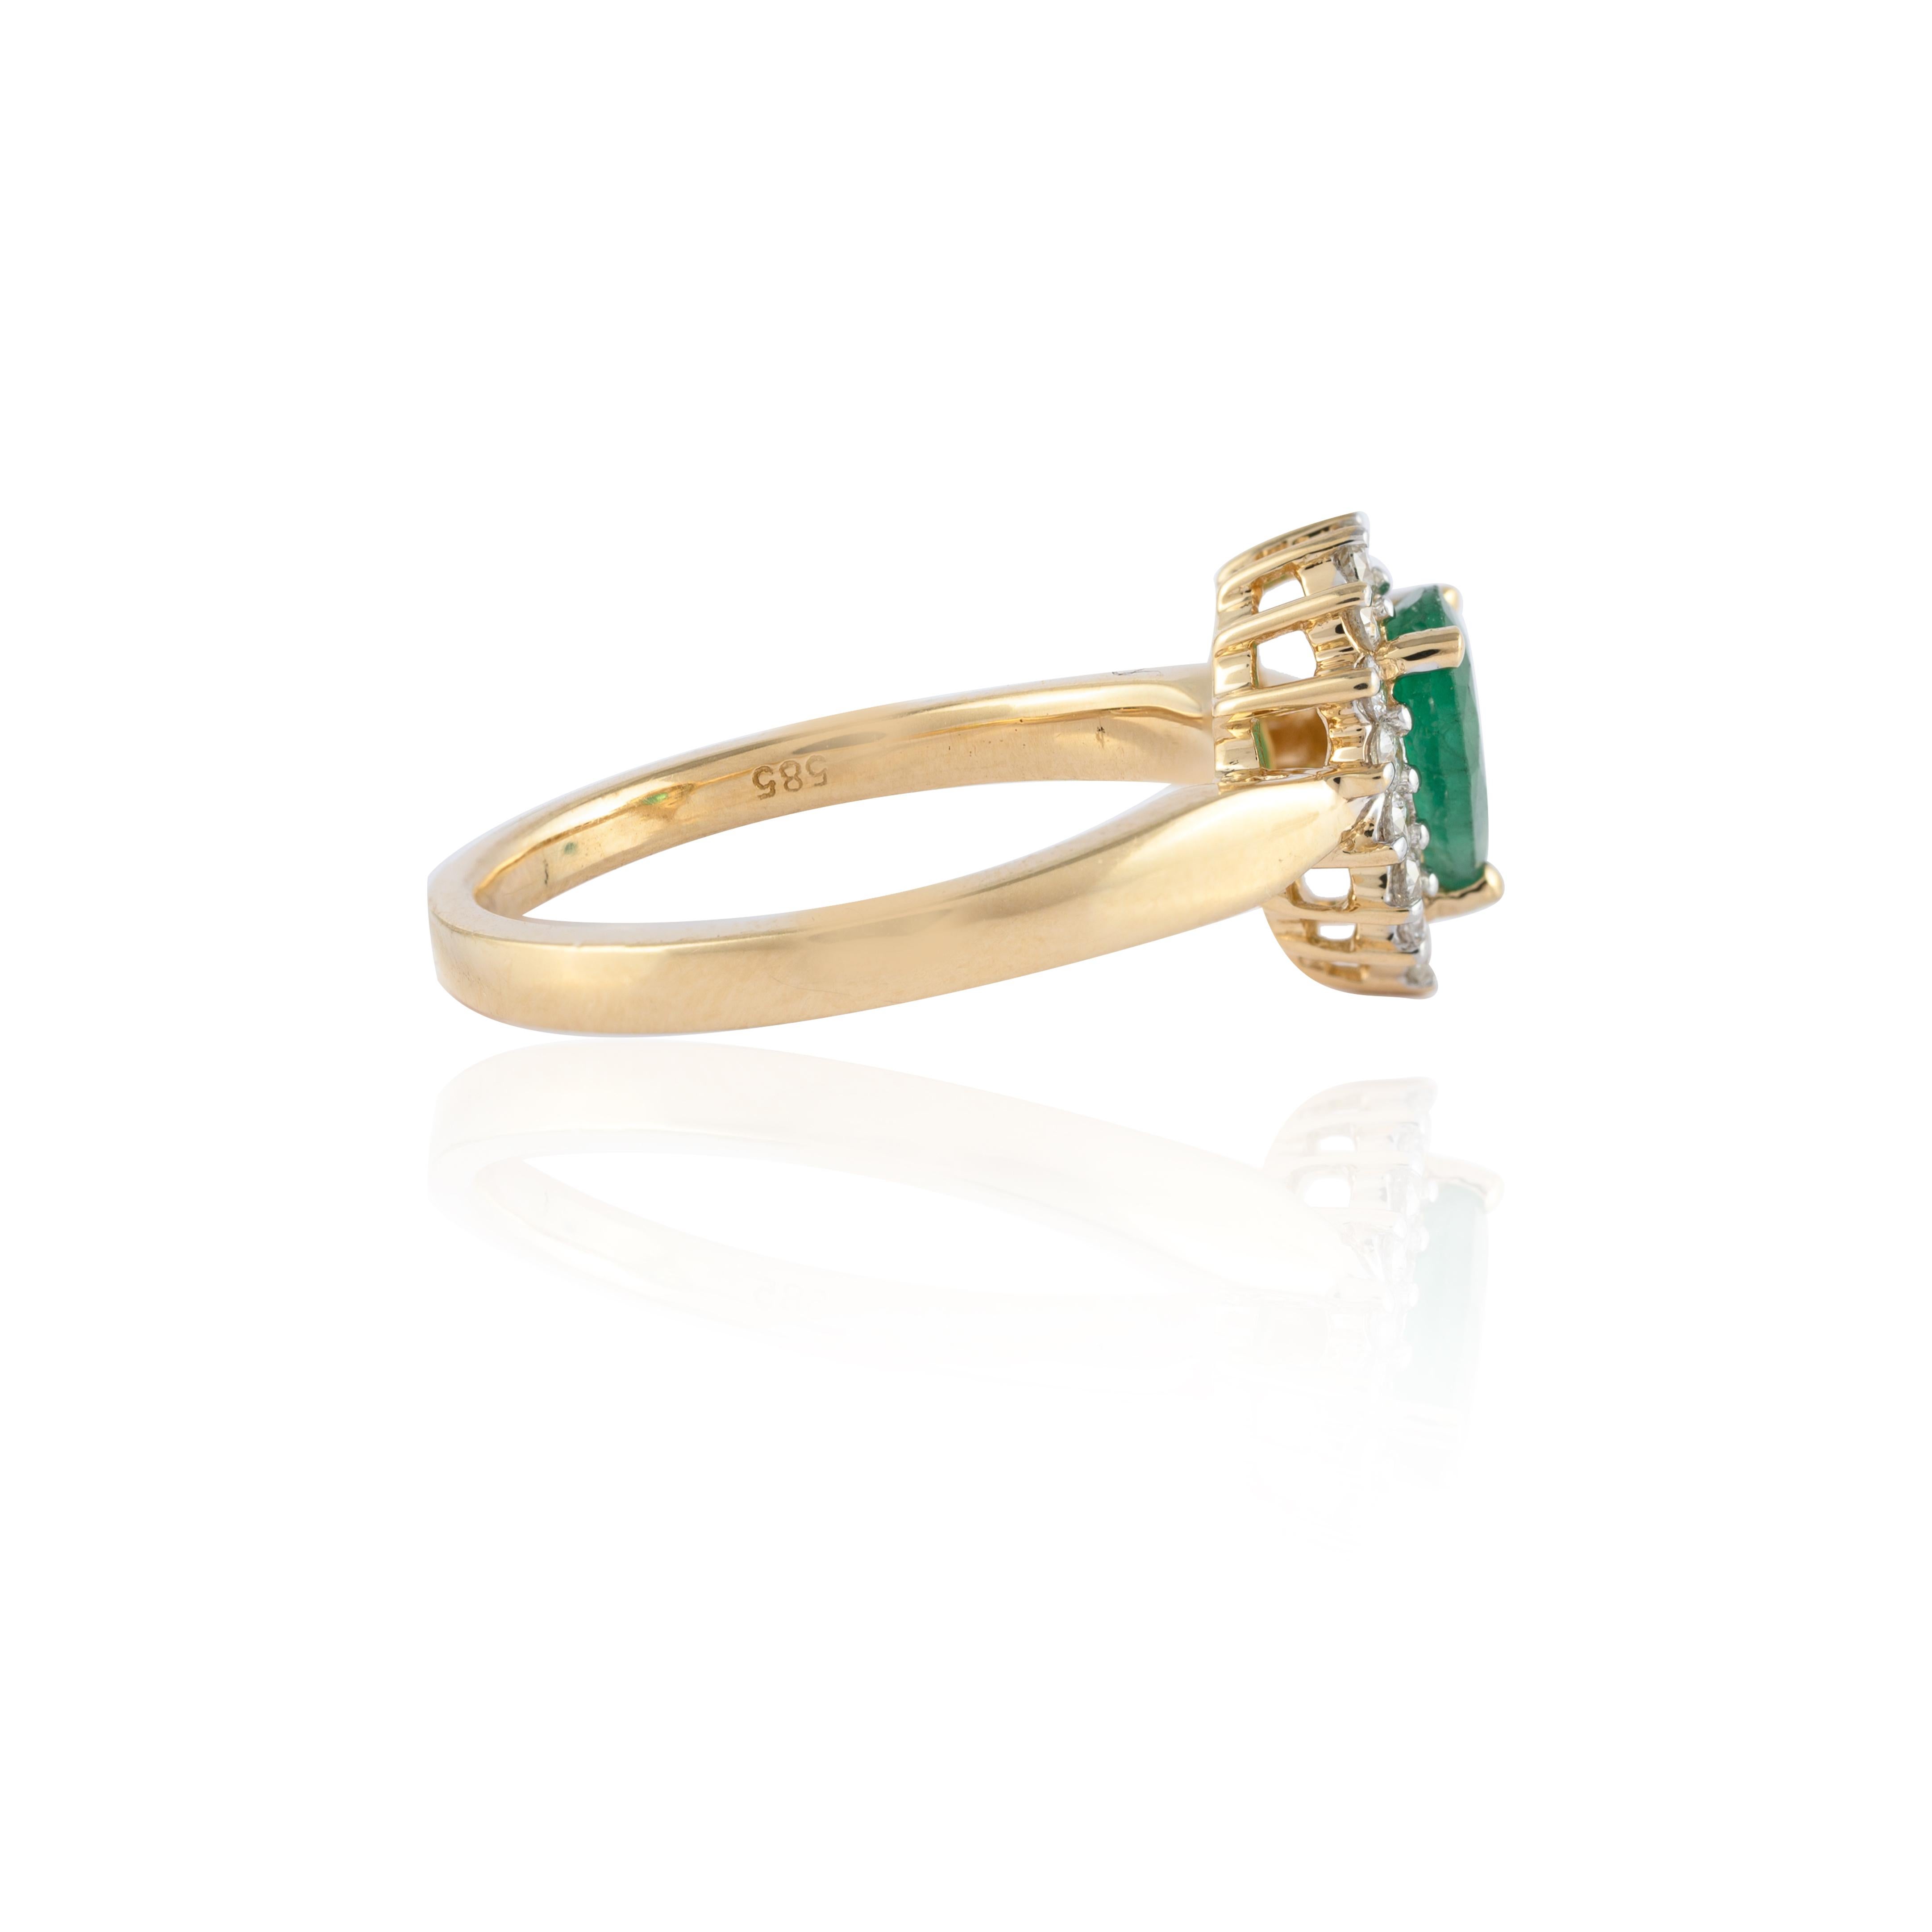 For Sale:  Pear Cut Emerald and Halo Diamond Wedding Ring Crafted in 14k Solid Yellow Gold 3